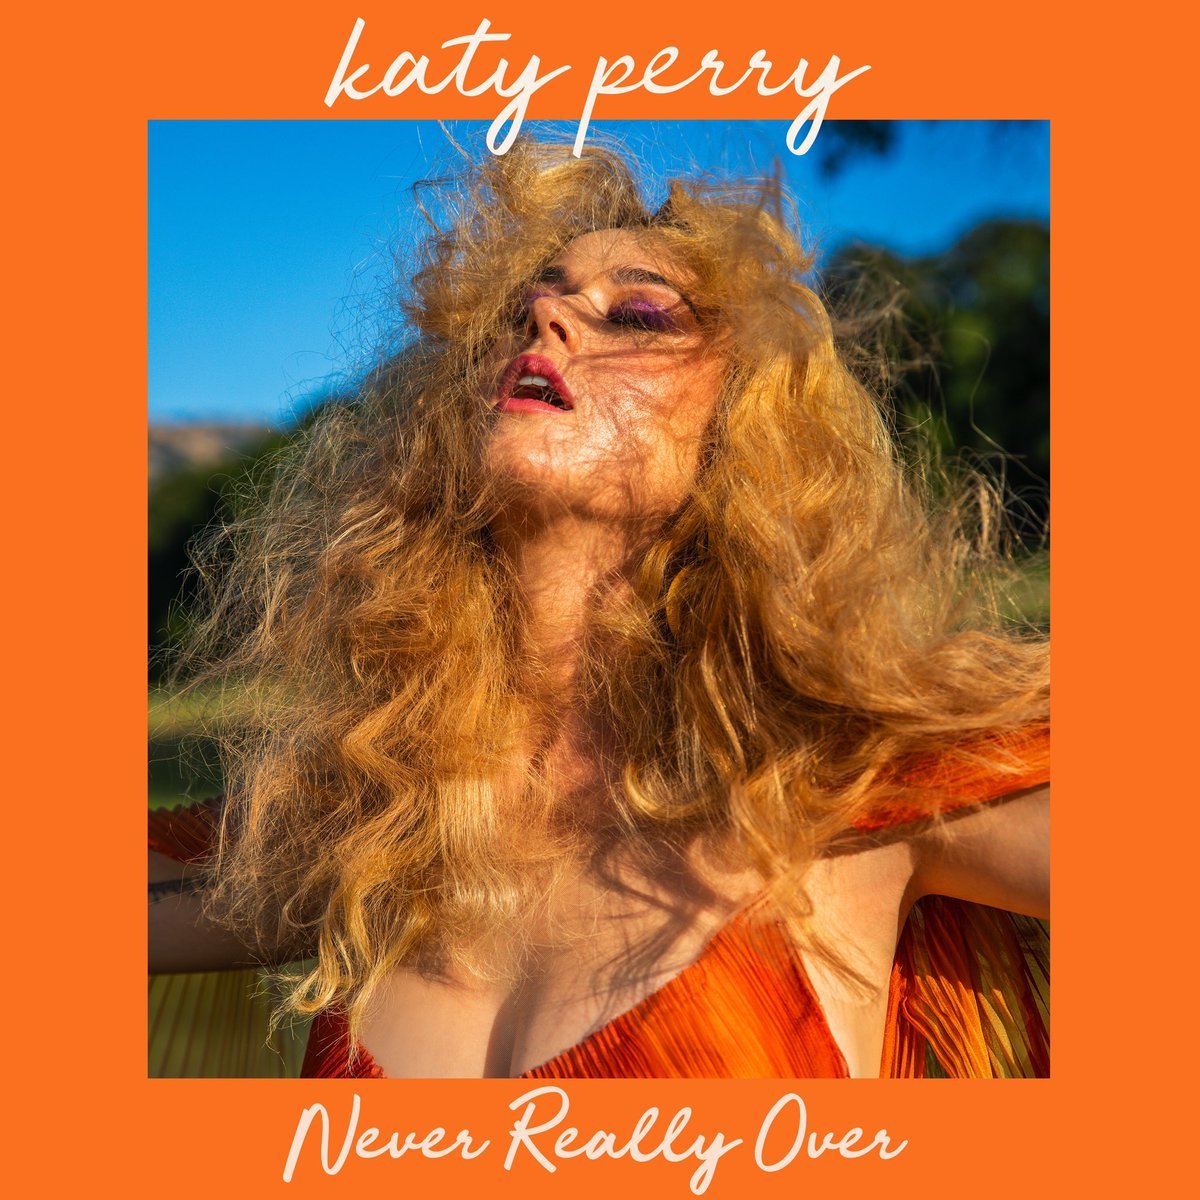 Katy-Perry-Never-Really-Over